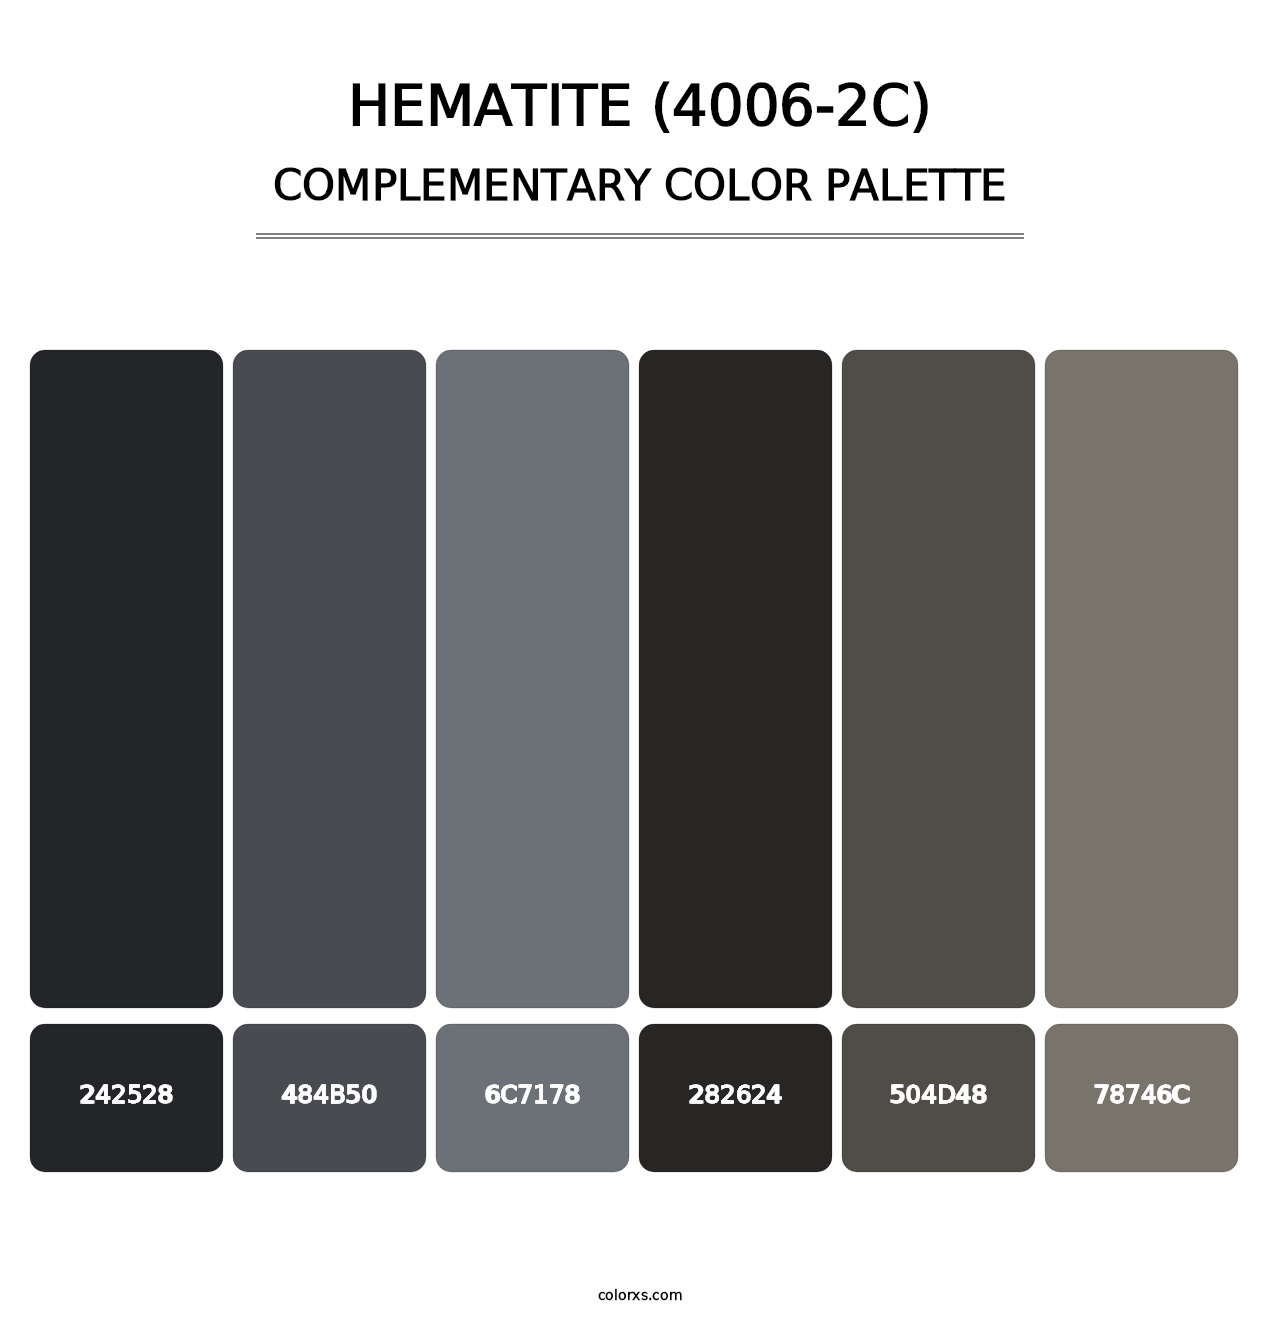 Hematite (4006-2C) - Complementary Color Palette